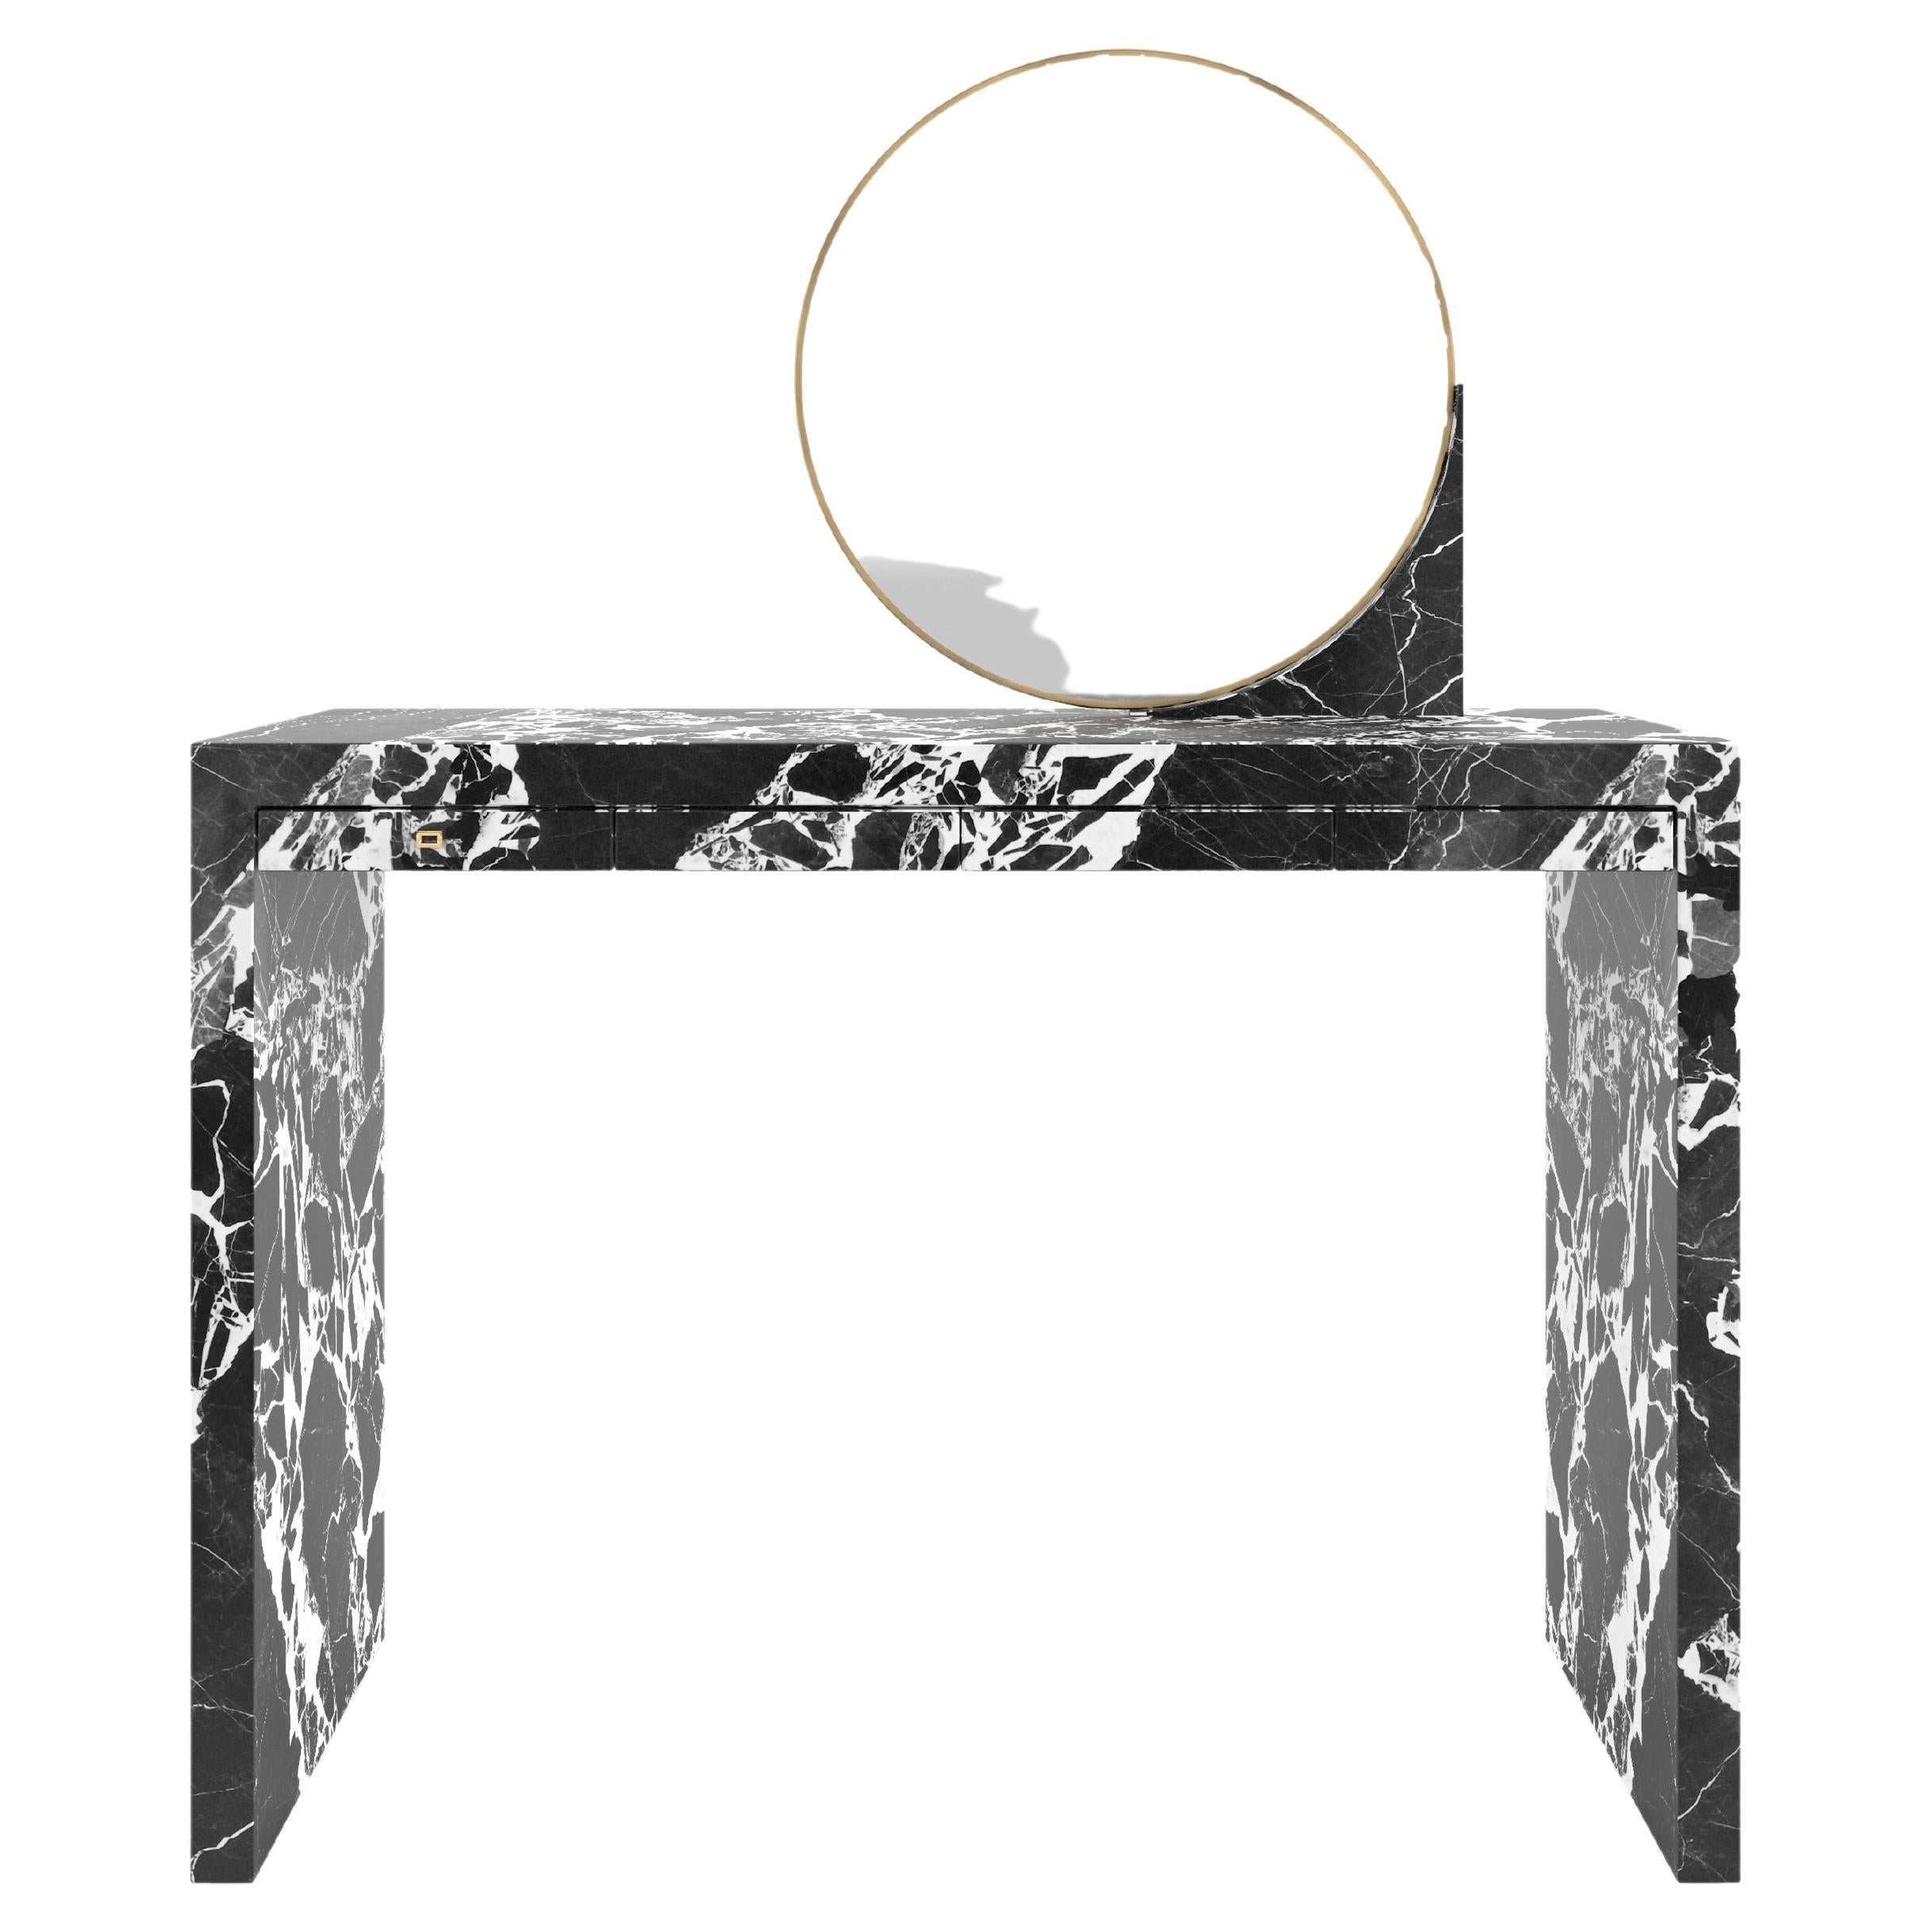 Console-Sideboard, 120x44x88cm Black-White Marble, Drawers, Handcrafted pc1/1 For Sale